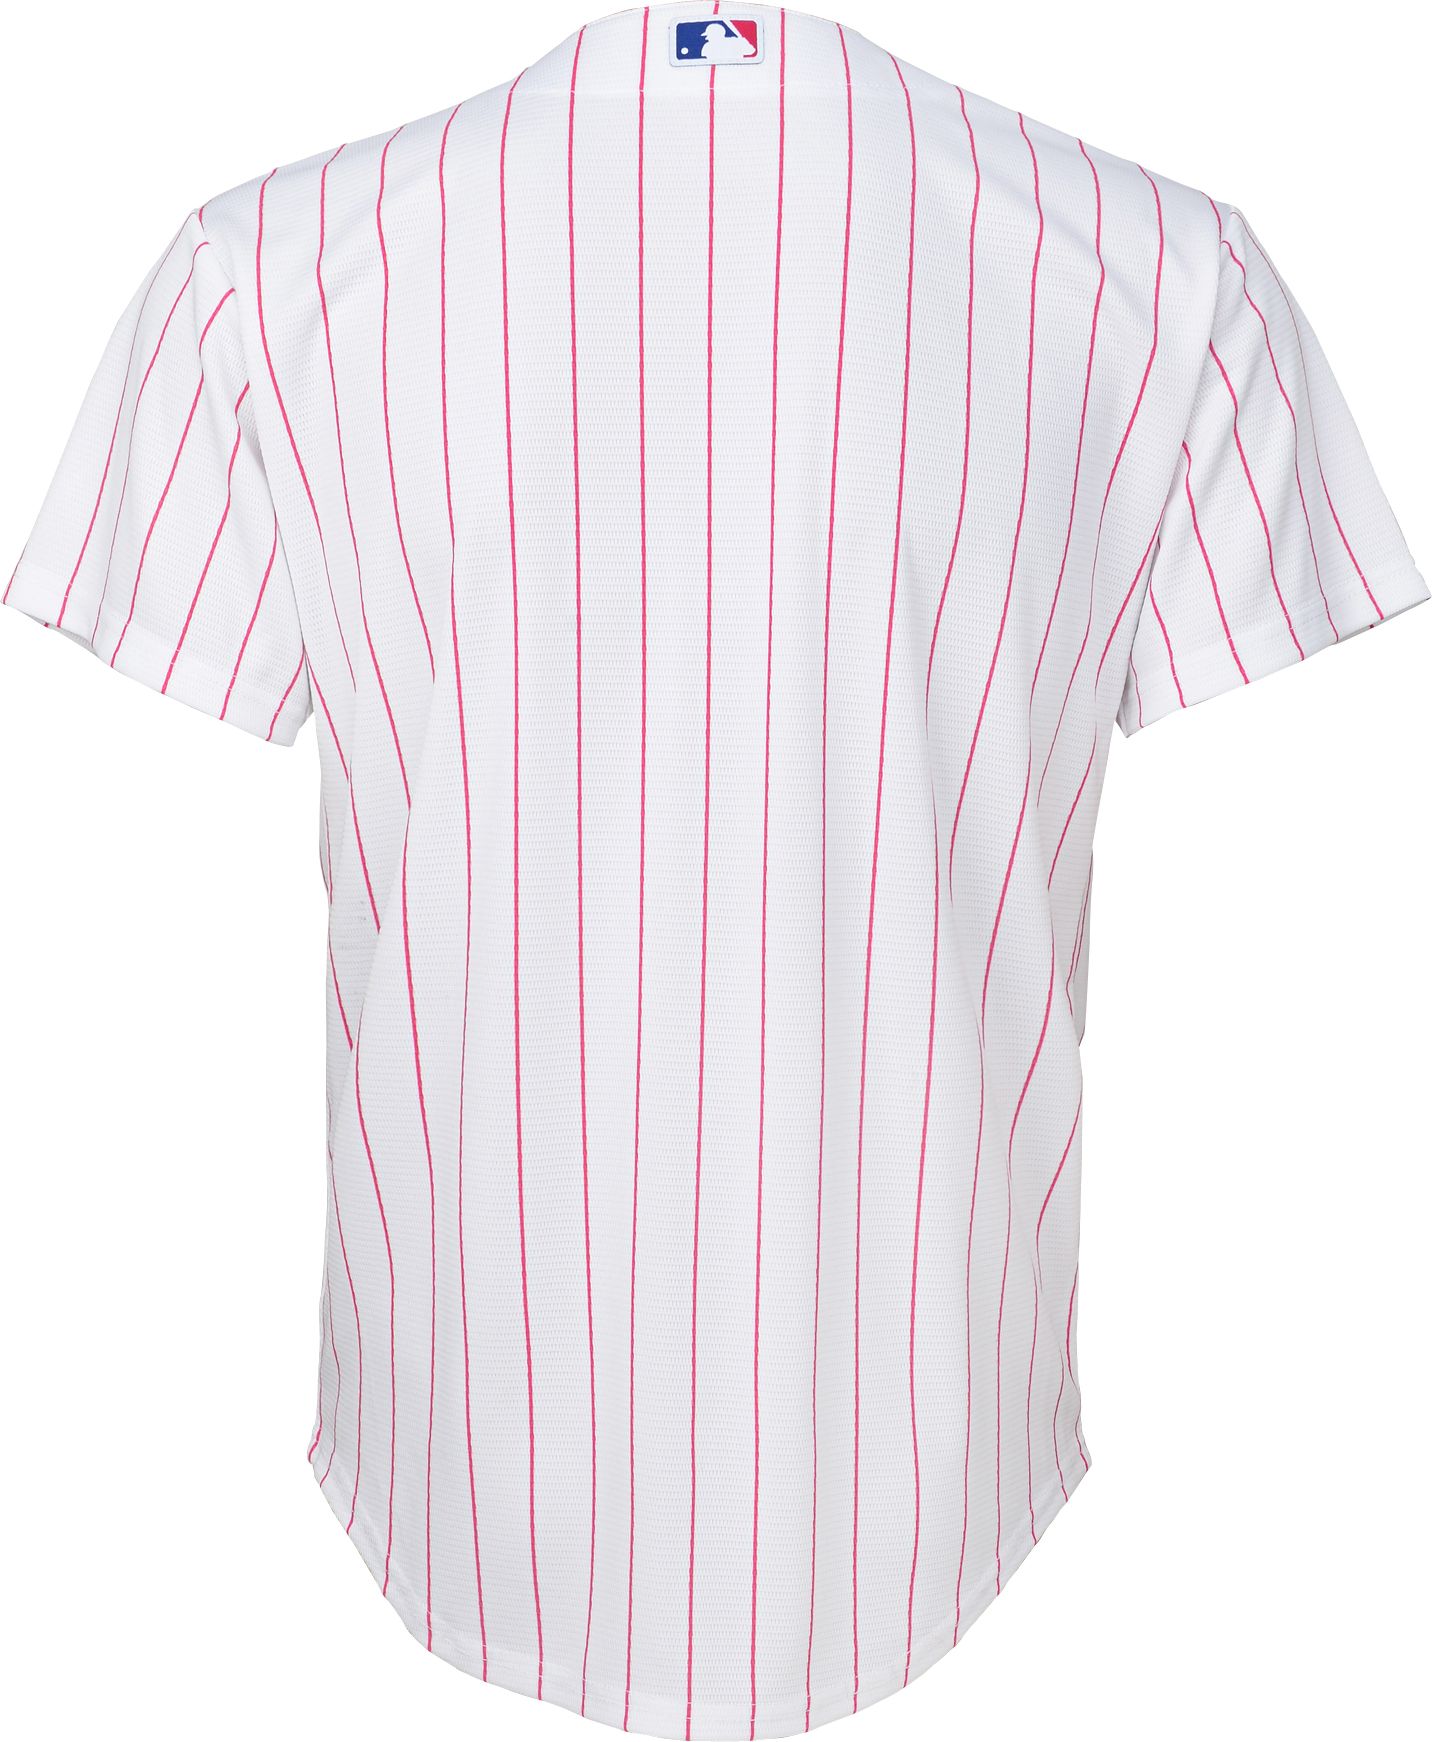 Phillies cool base jersey